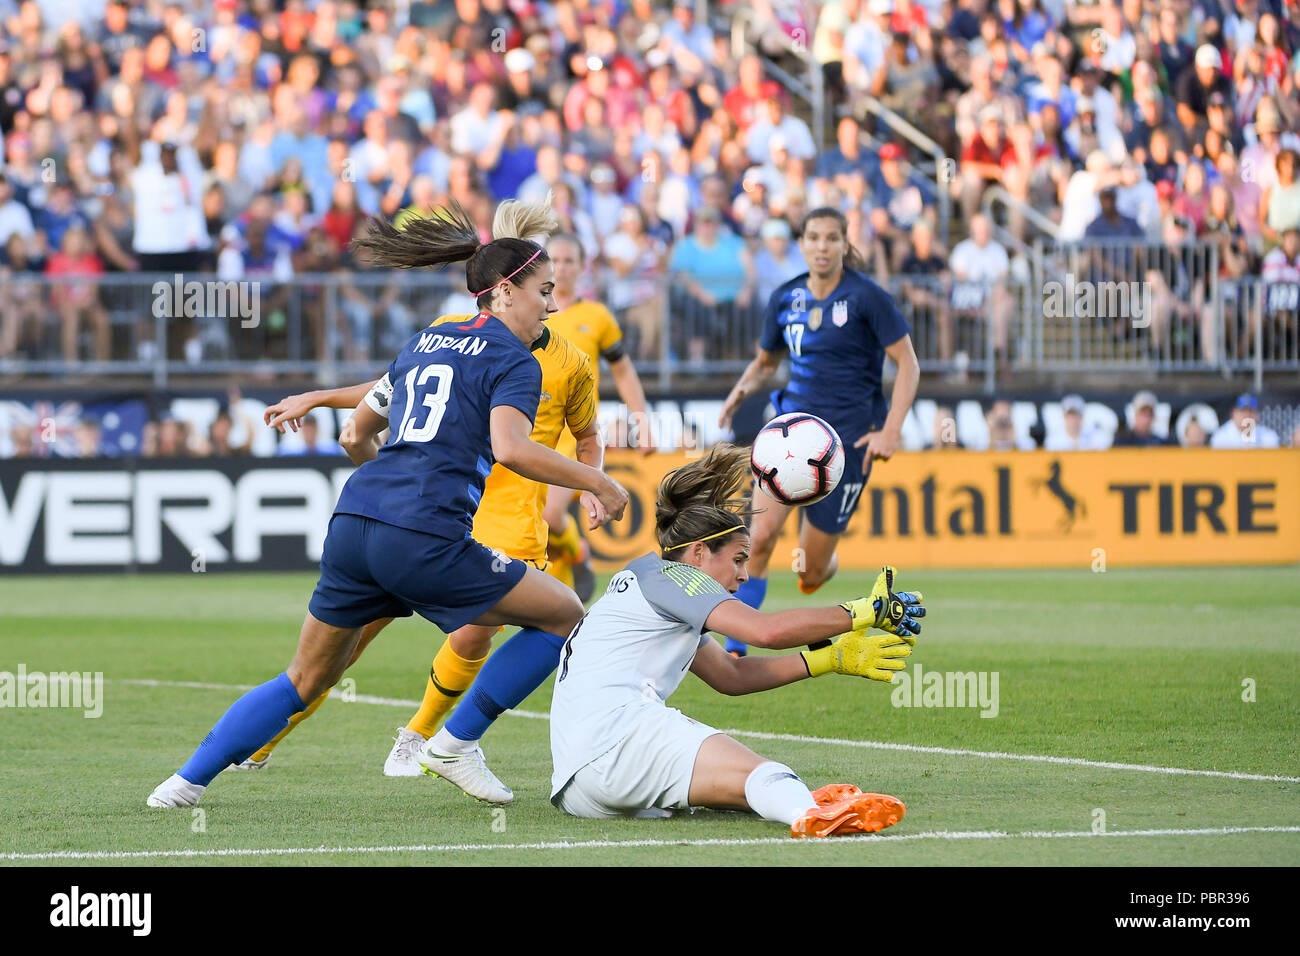 East Hartford Conn, USA. 29th July, 2018. Australia goalkeeper Lydia Williams (1) tries to capture the loose ball as USA forward Alex Morgan (13) circles from behind during the Tournament of Nations match between the women's national teams of the United States and Australia, held at the Pratt and Whitney Stadium, in East Hartford Conn. Eric Canha/CSM/Alamy Live News Stock Photo